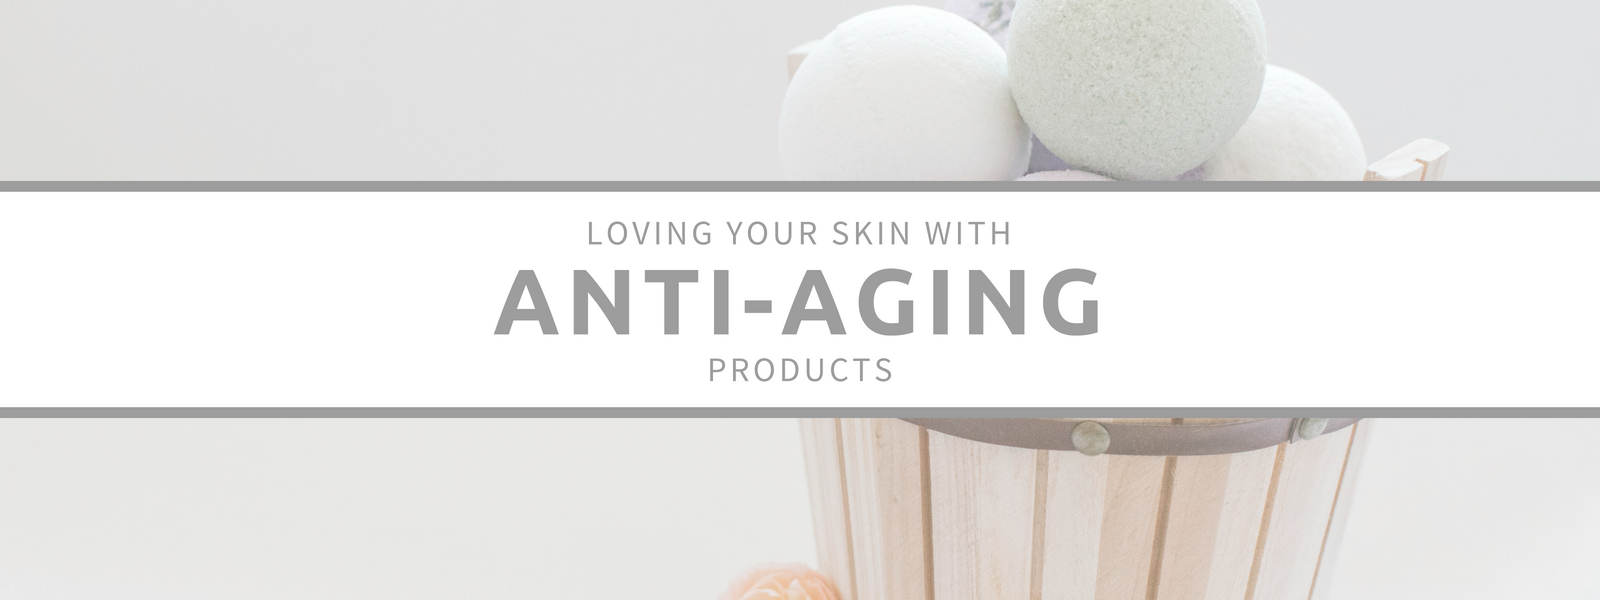 ANTI-AGING PRODUCTS